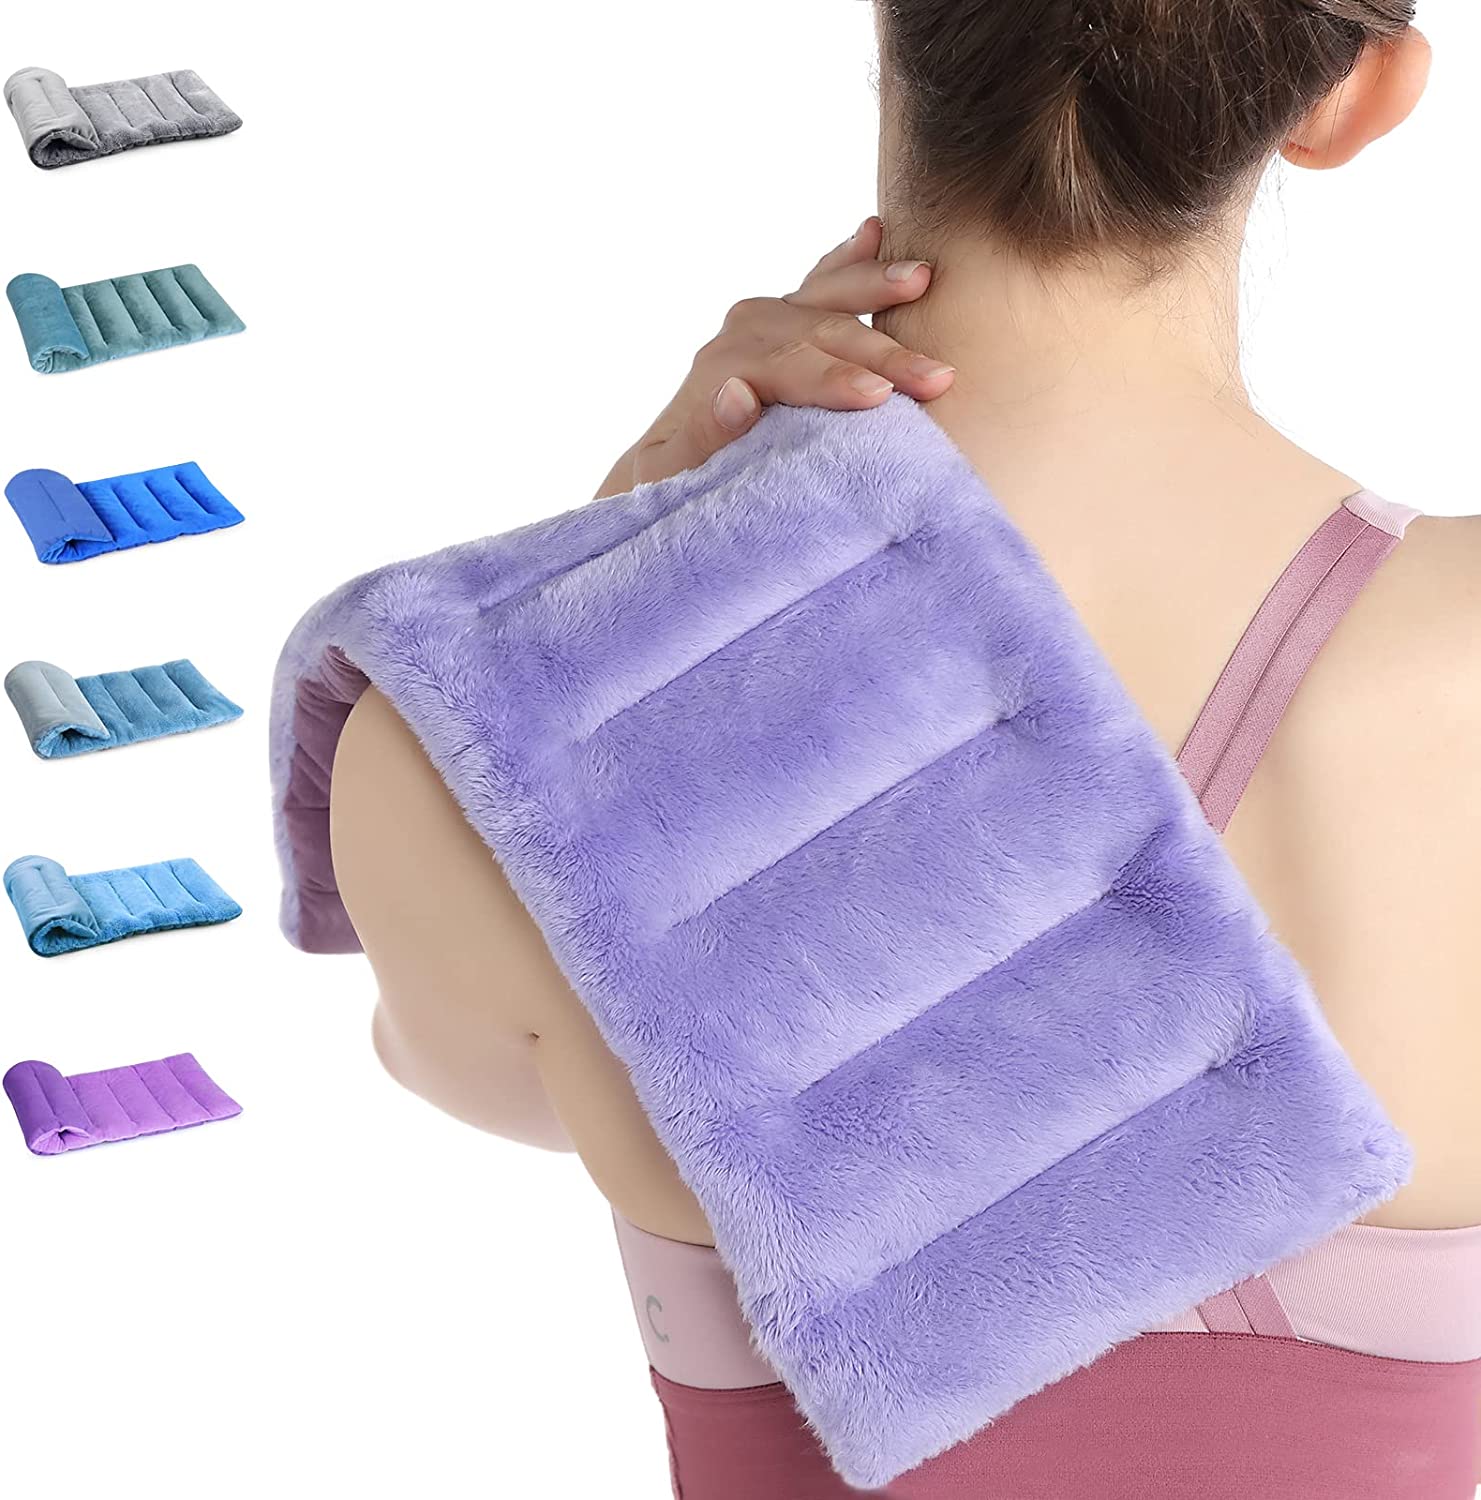 SuzziPad Inflammation Relief Microwave Heating Pad